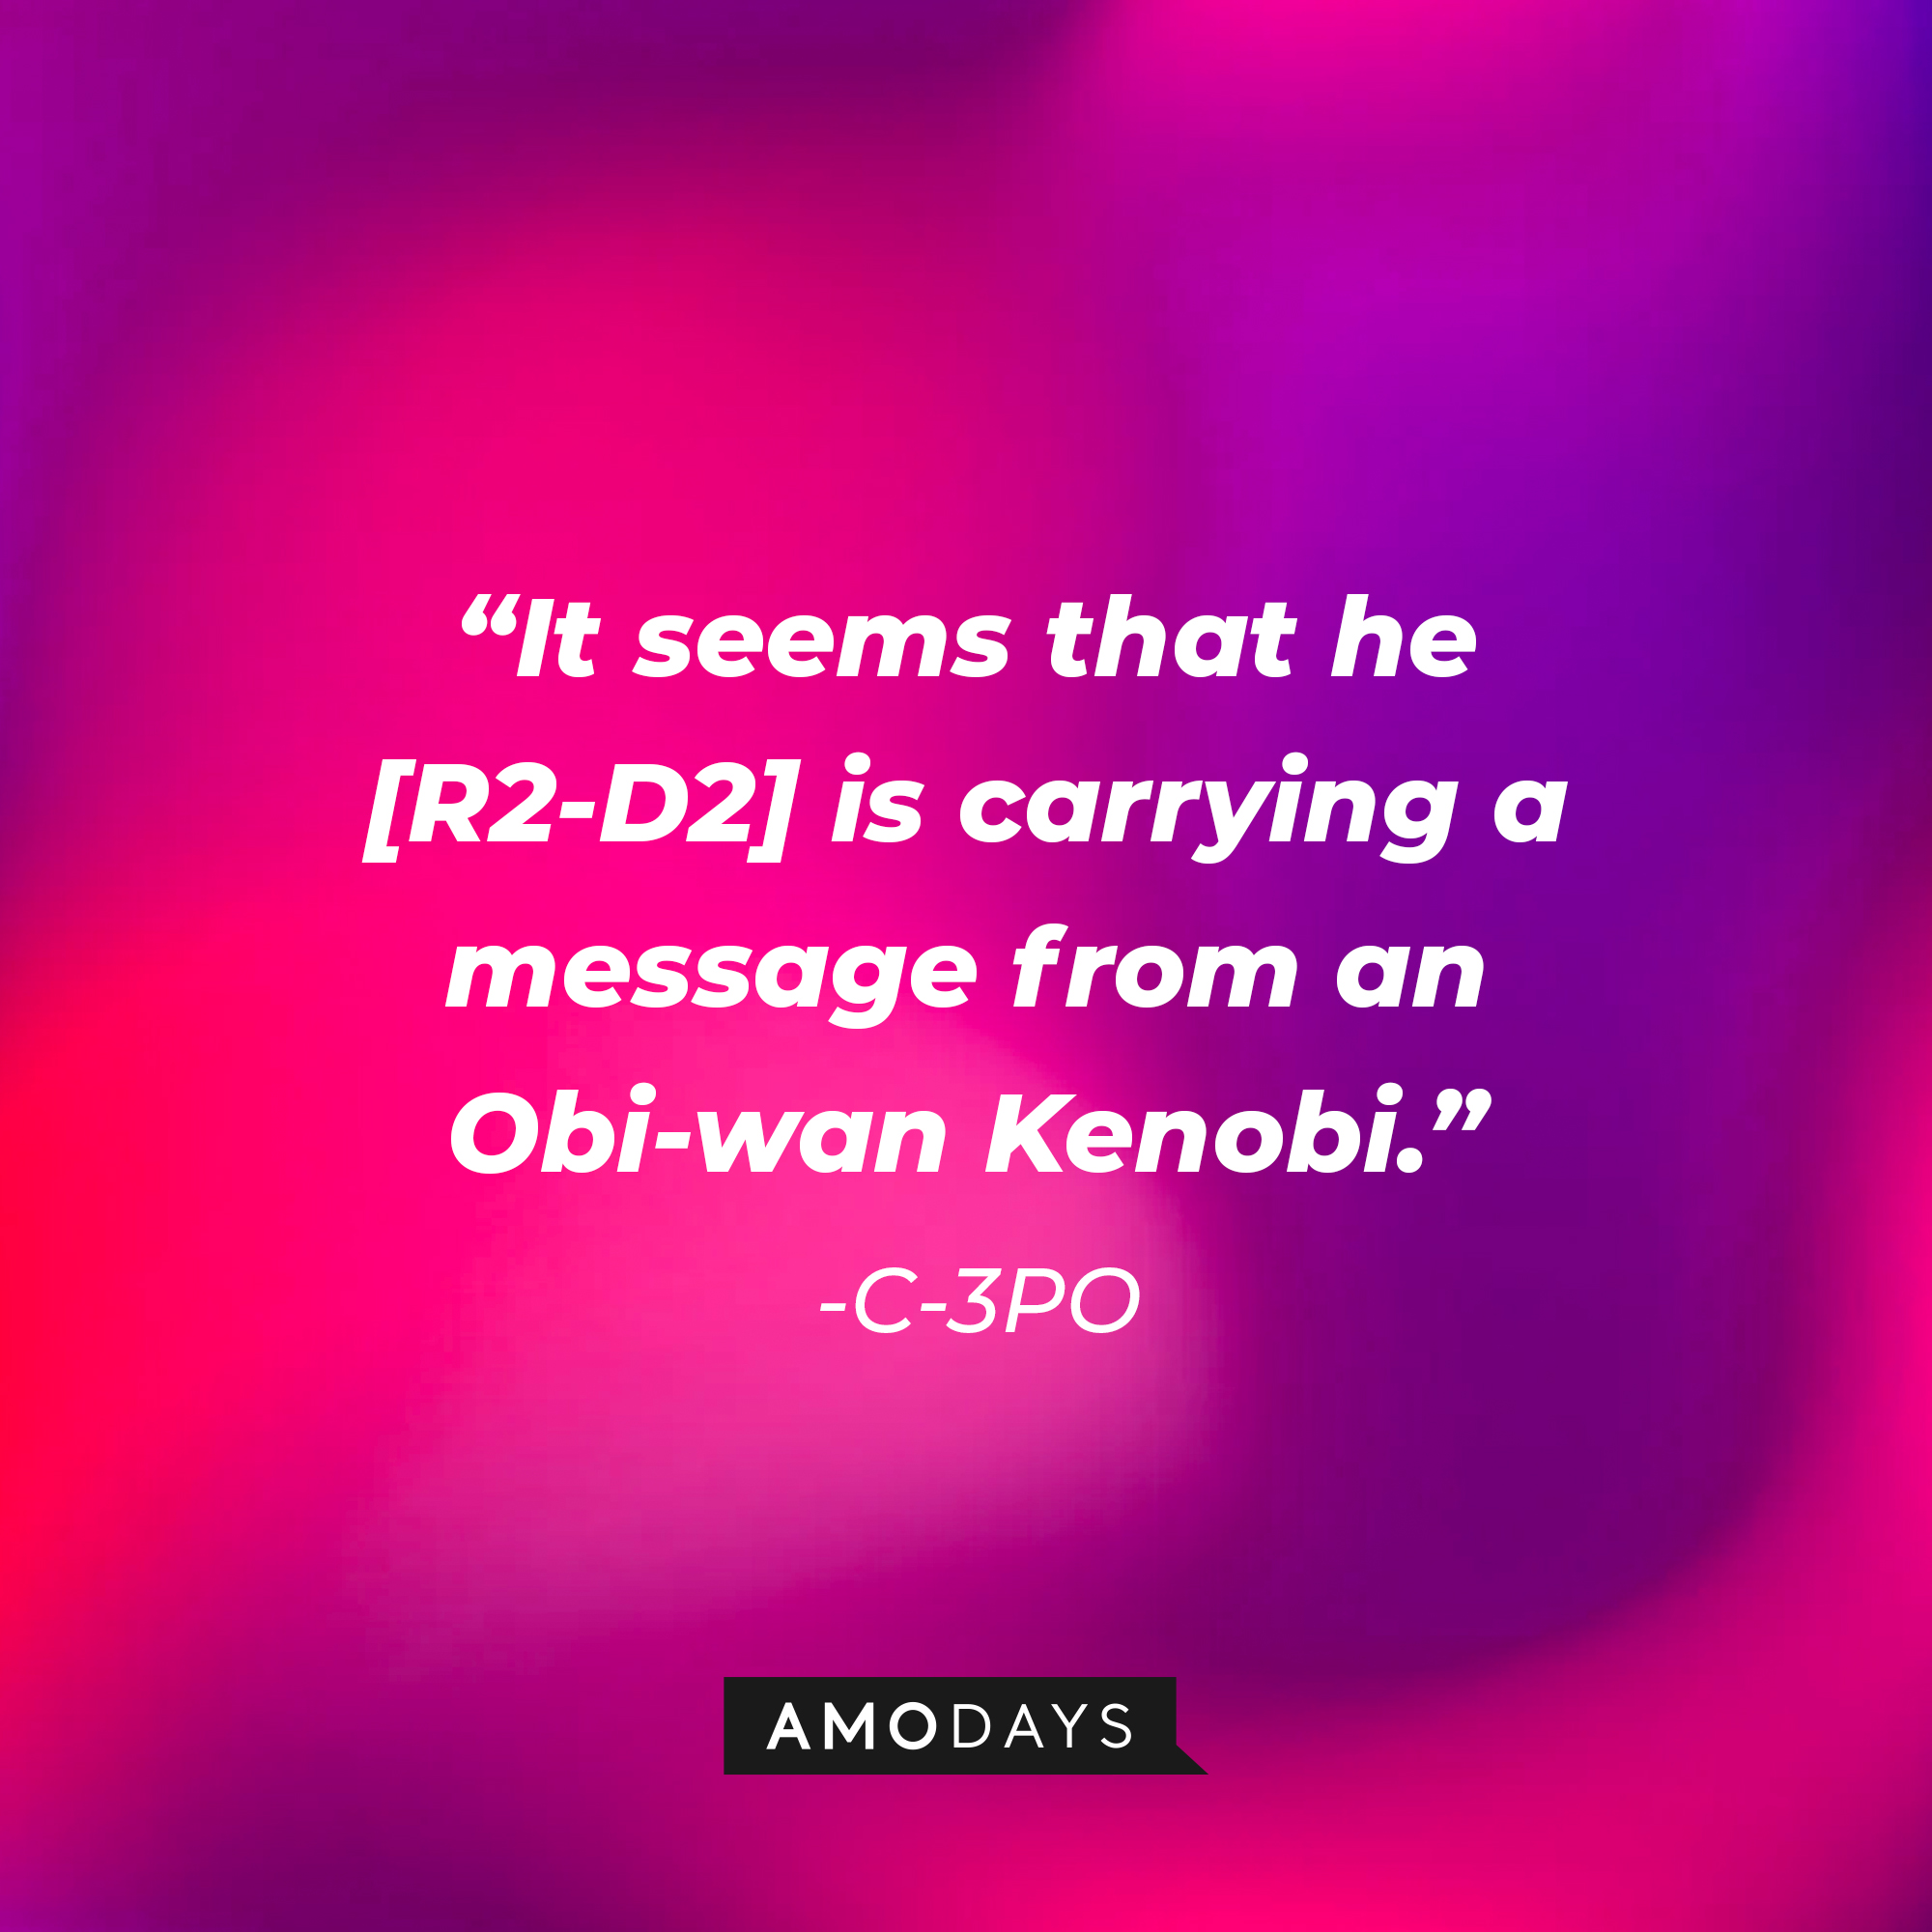 C-3PO's quote: "It seems that he [R2-D2] is carrying a message from an Obi-wan Kenobi." | Source: AmoDays